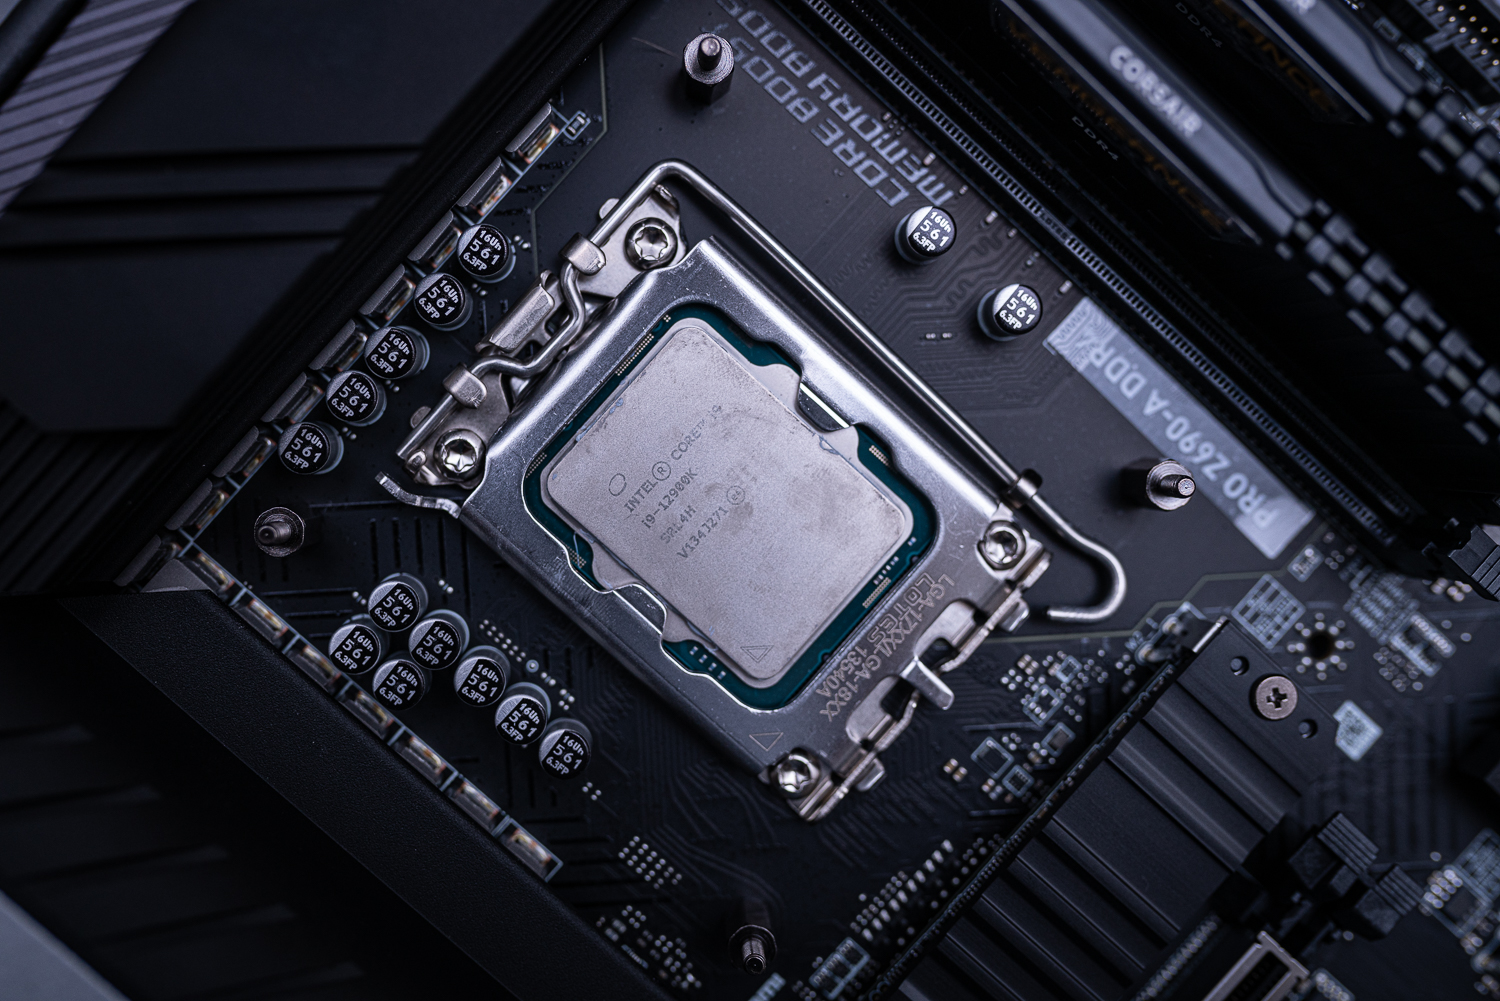 Intel Core i9-12900K review: Intel's return to form